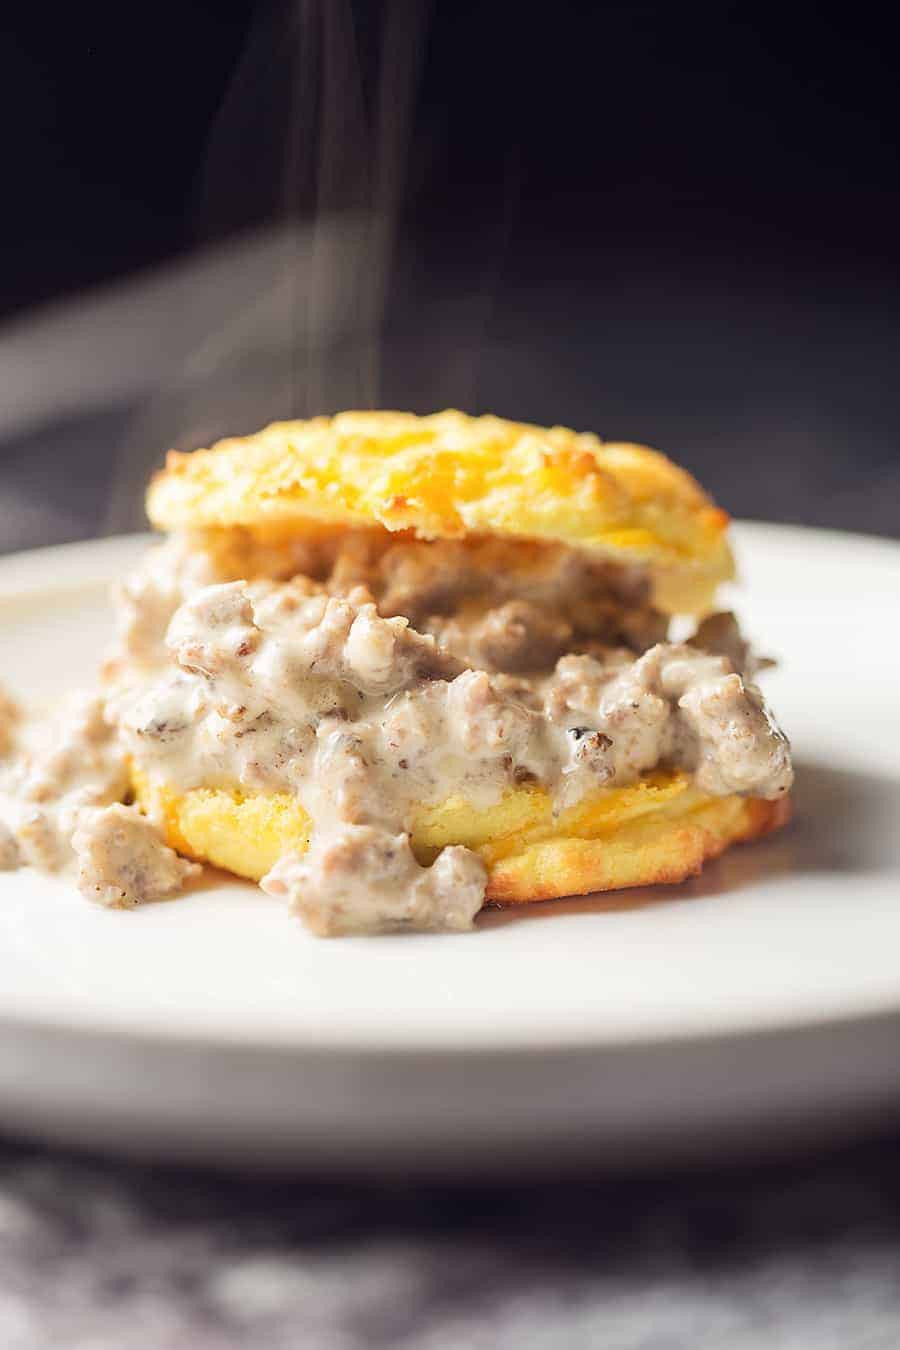 Low Carb Biscuits And Gravy
 Low Carb Biscuits and Gravy • Low Carb with Jennifer